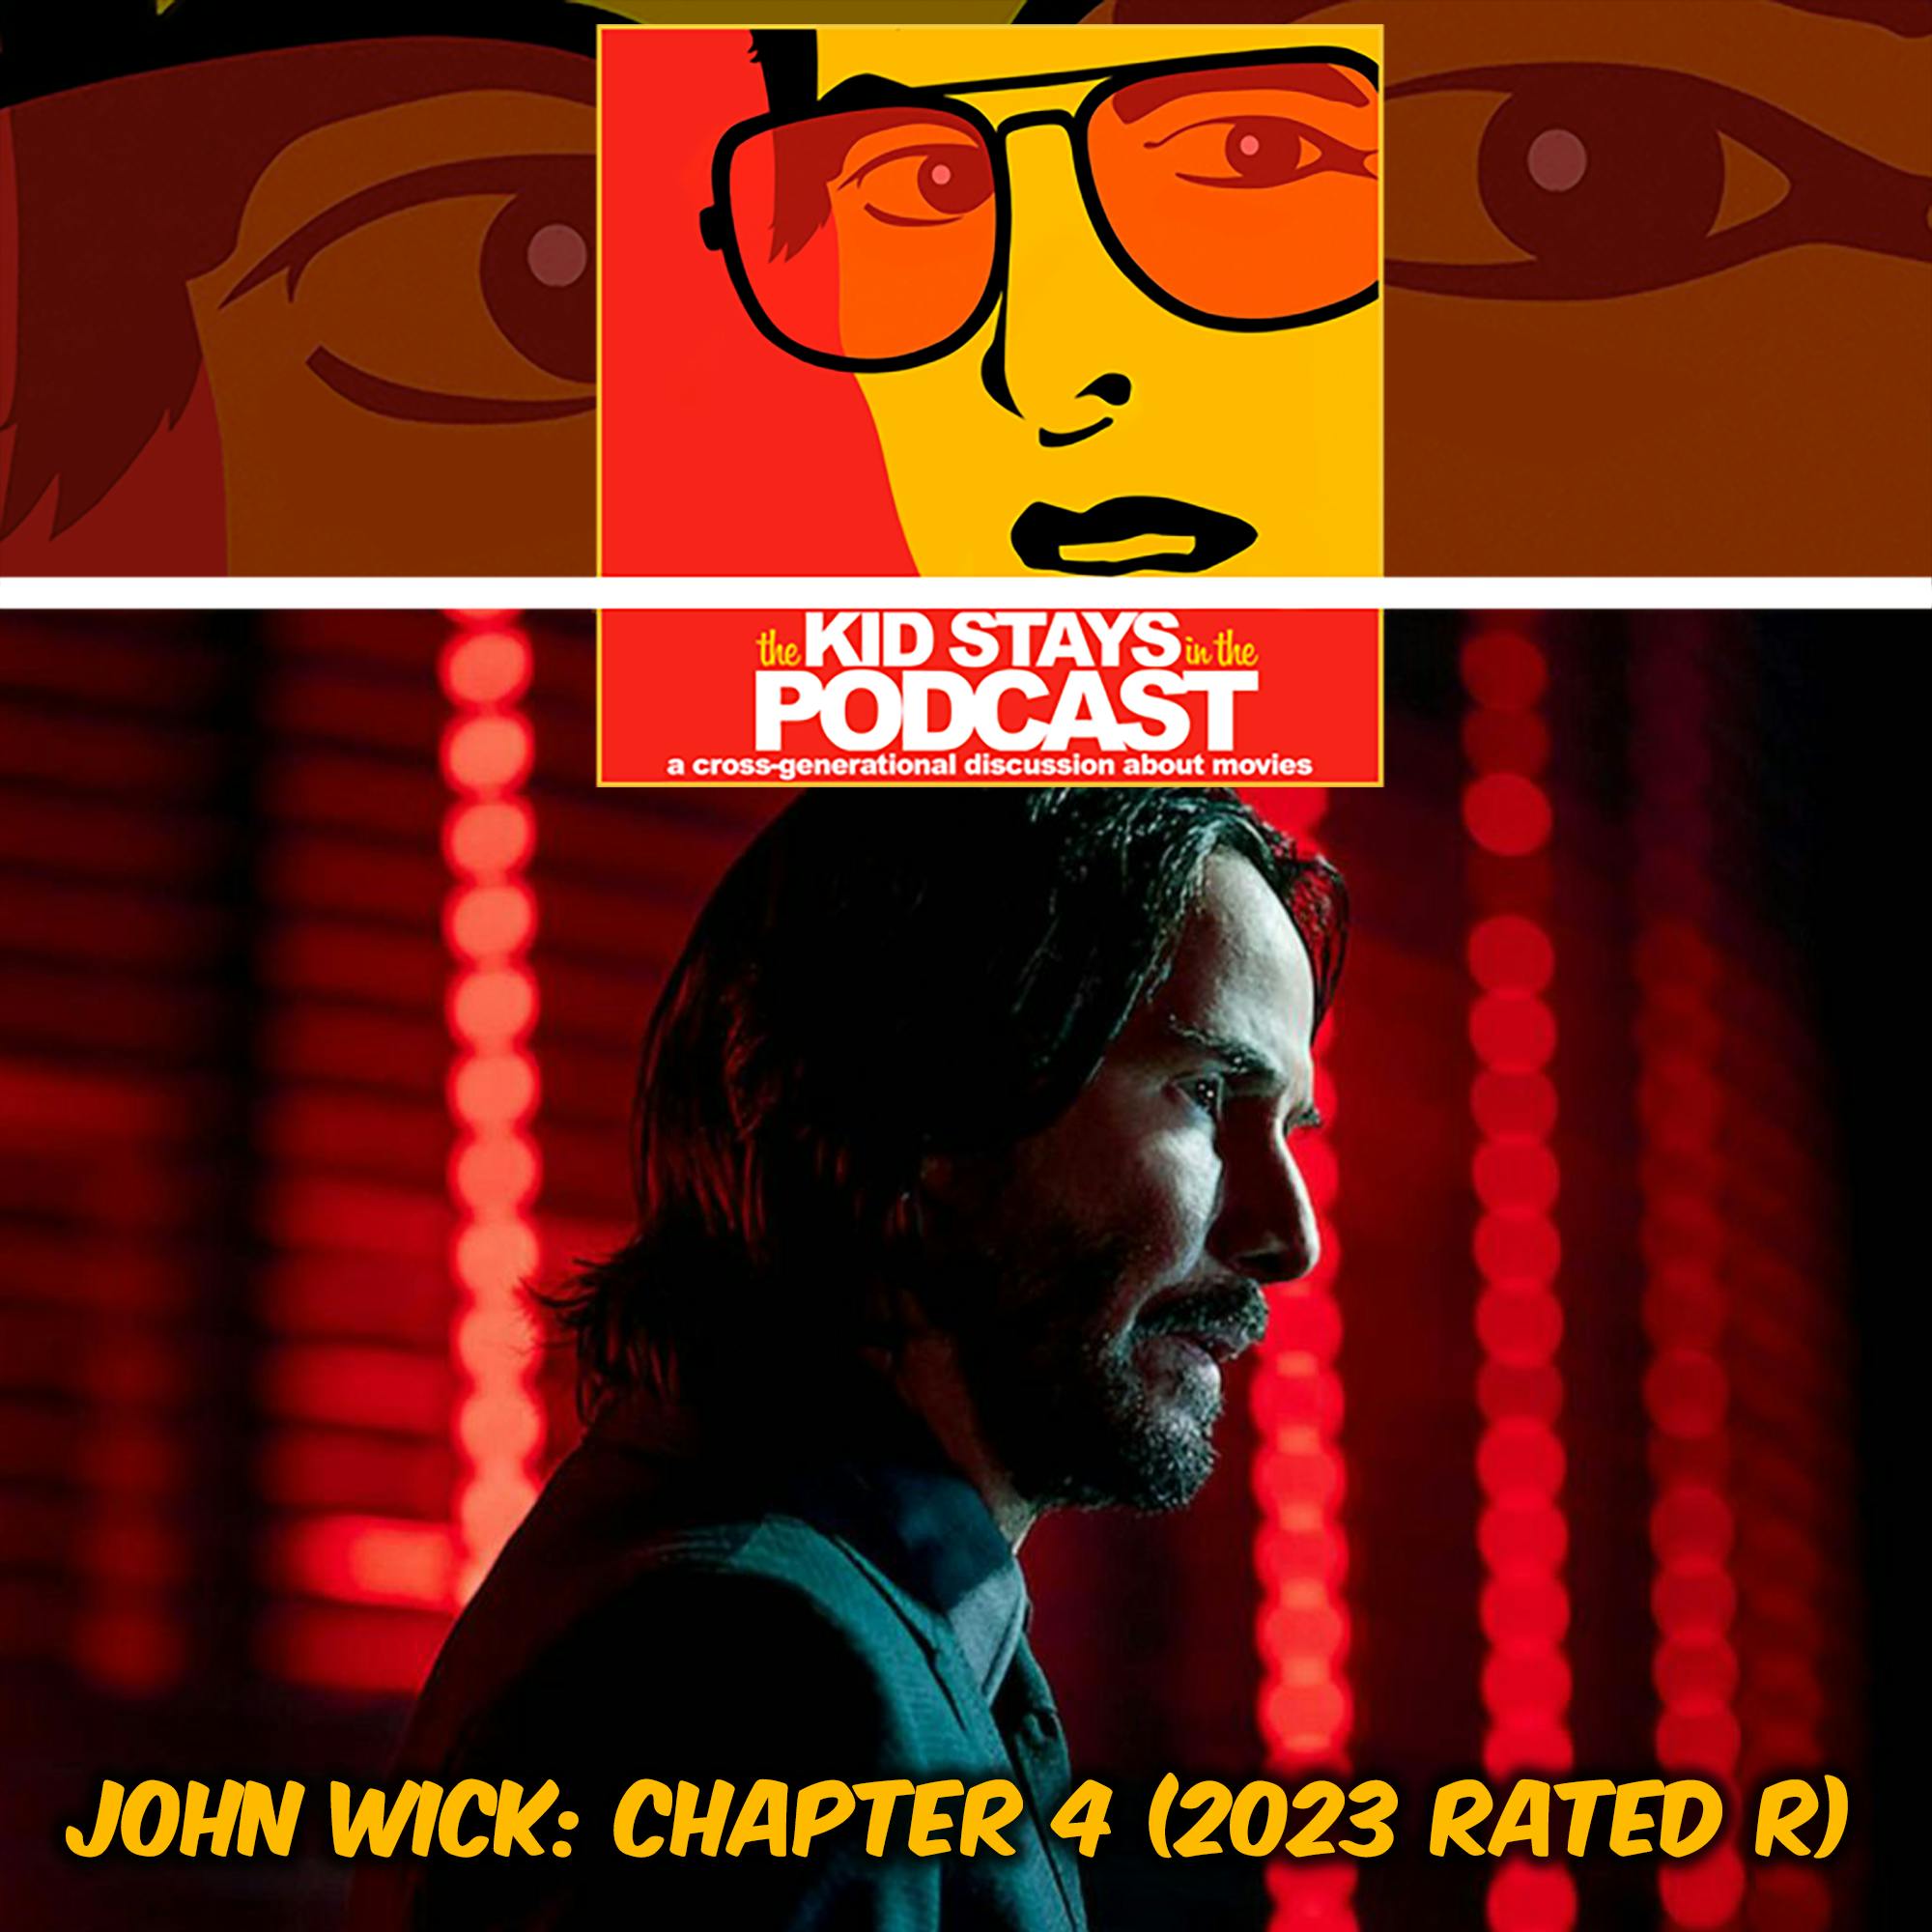 John Wick: Chapter 4 (2023 Rated R)